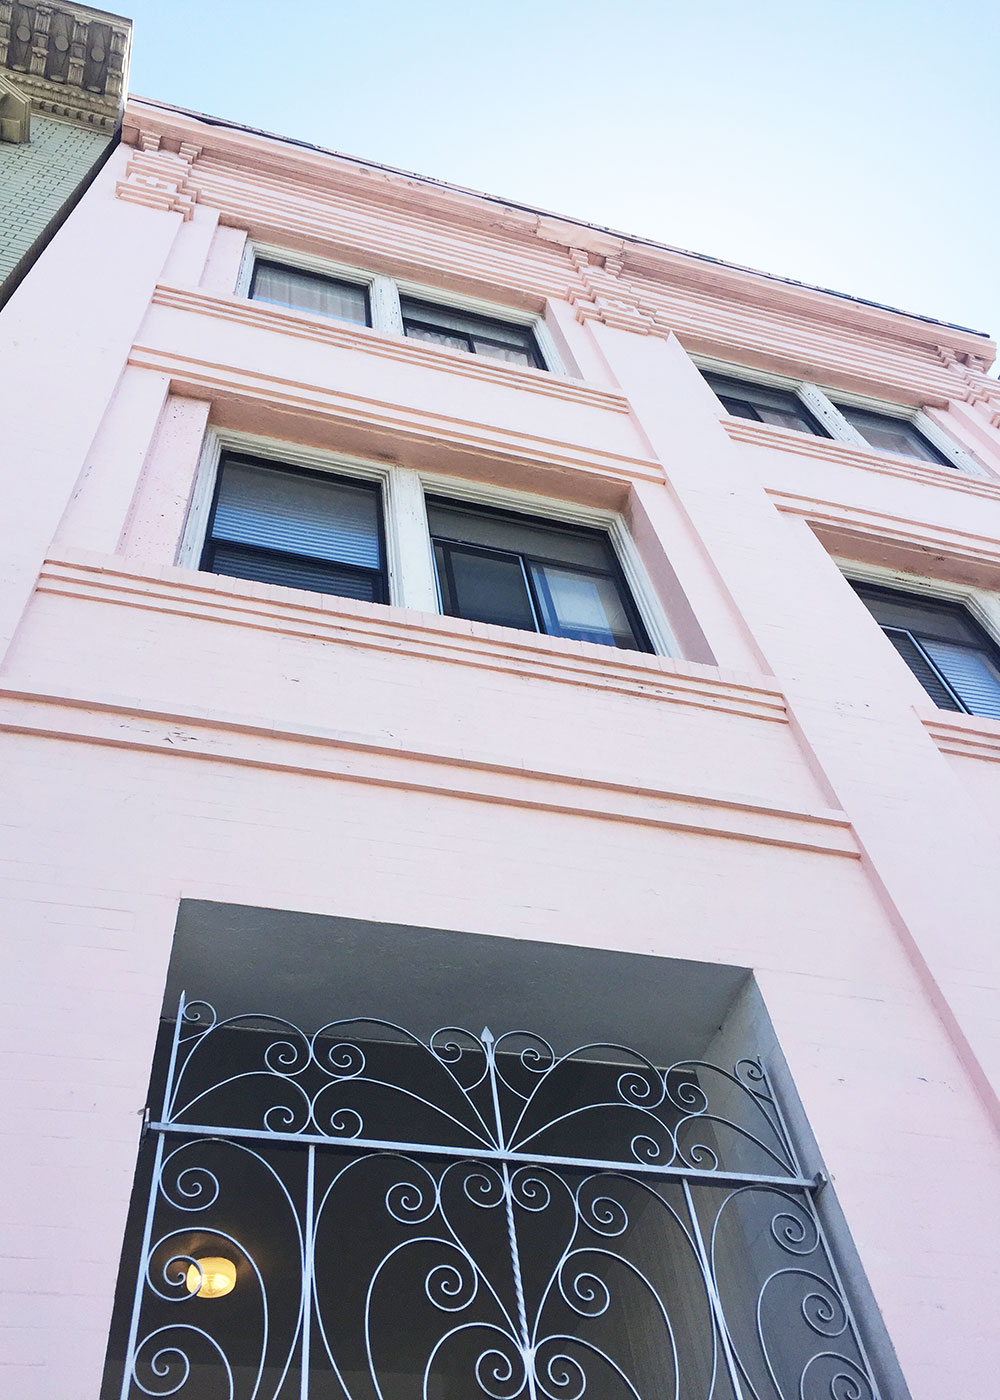 finding pretty pink buildings in san francisco | thelovedesignedlife.com